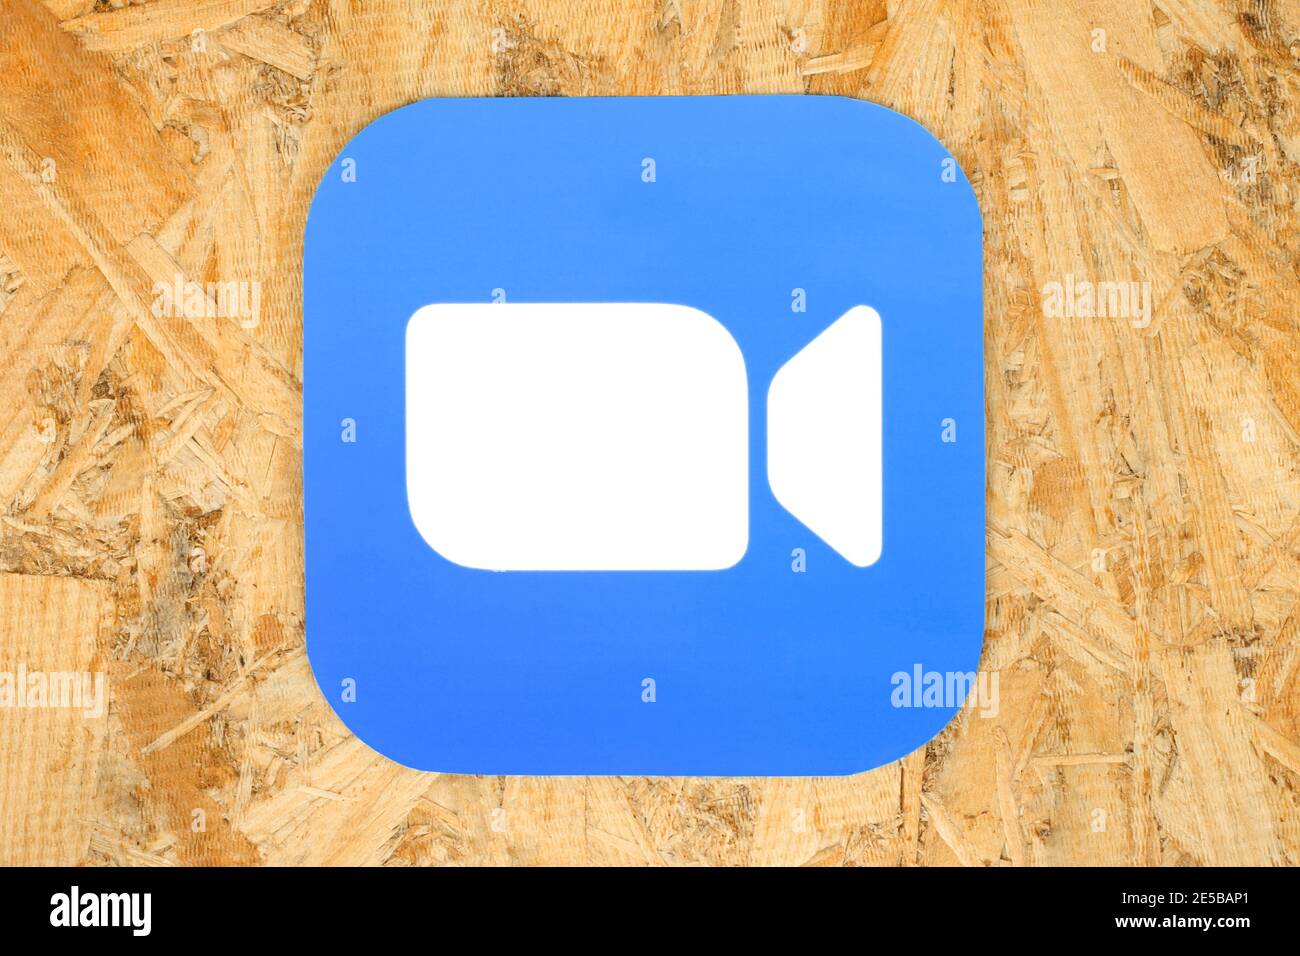 Kiev, Ukraine - August 25, 2020: Zoom icon on wooden background close-up, printed on paper. Zoom is a videotelephony software program developed by Zoo Stock Photo